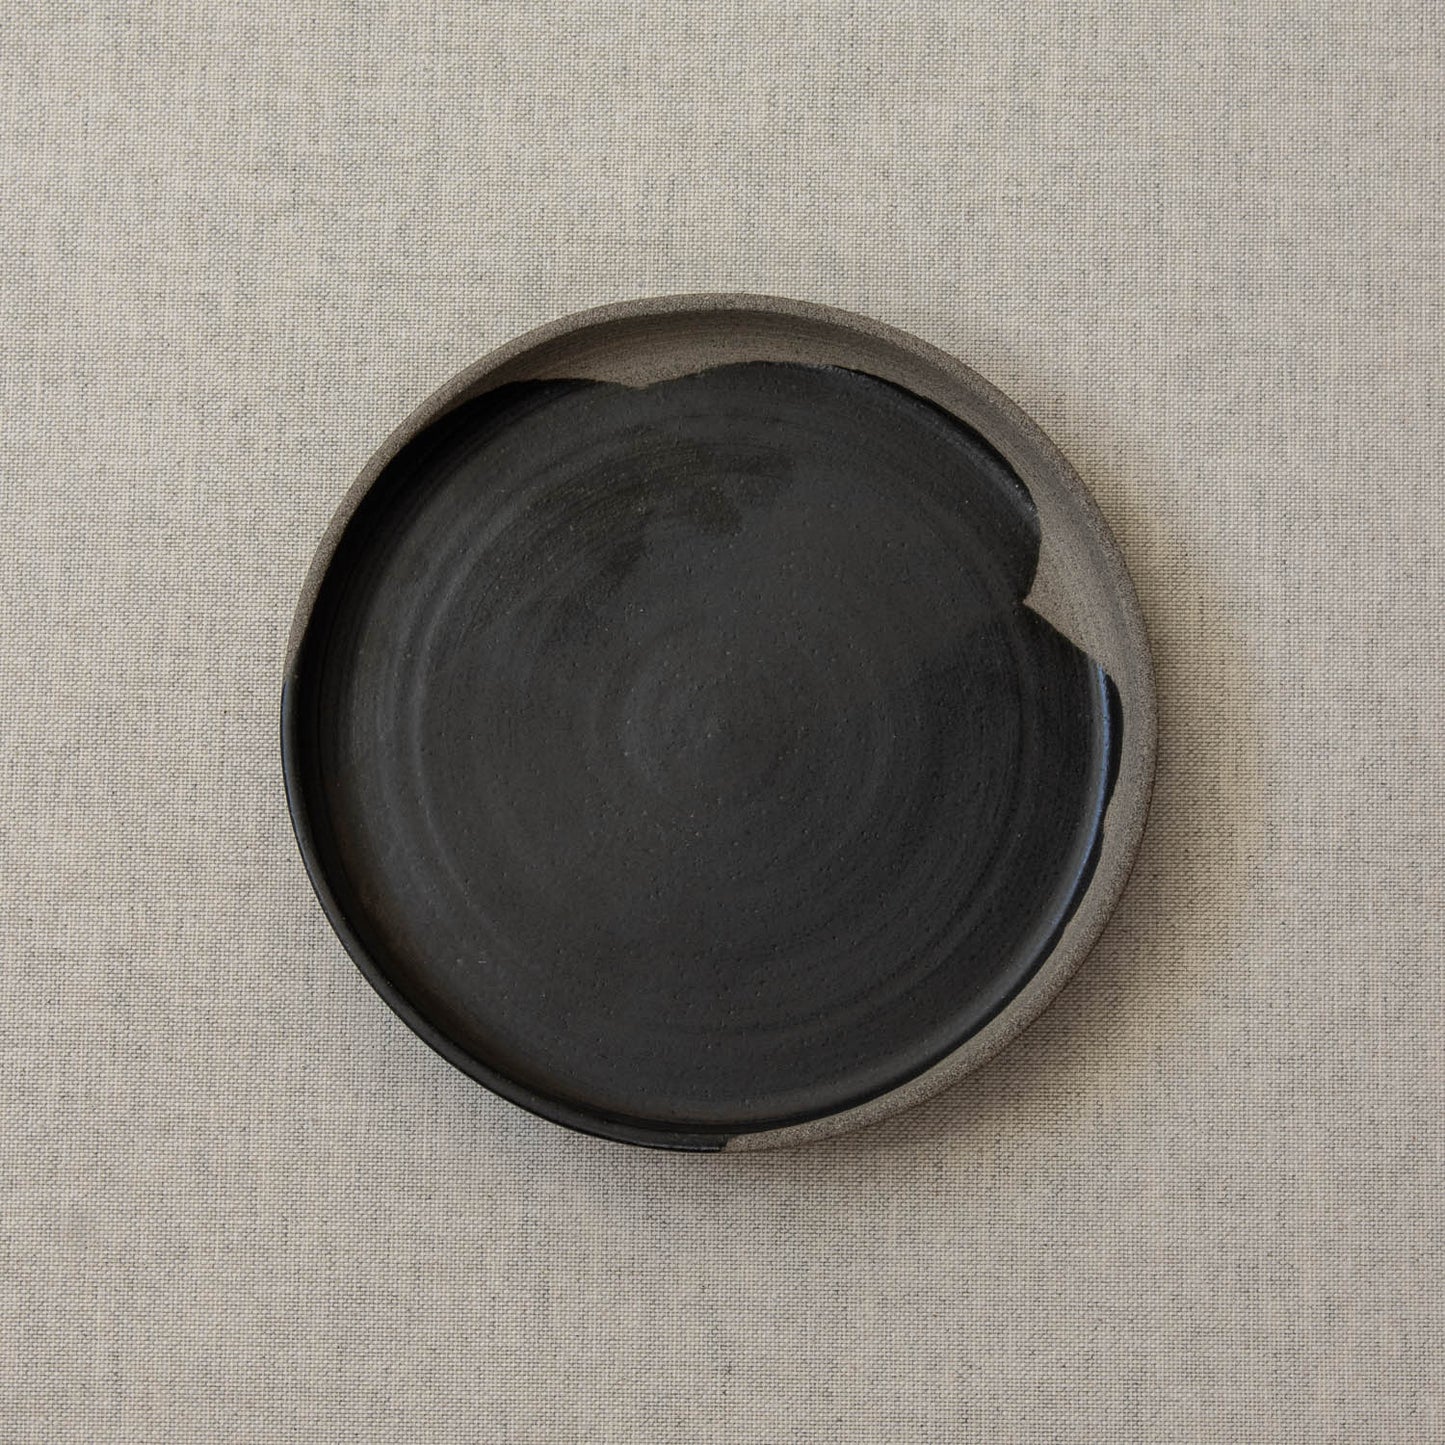 Small plate 18 cm